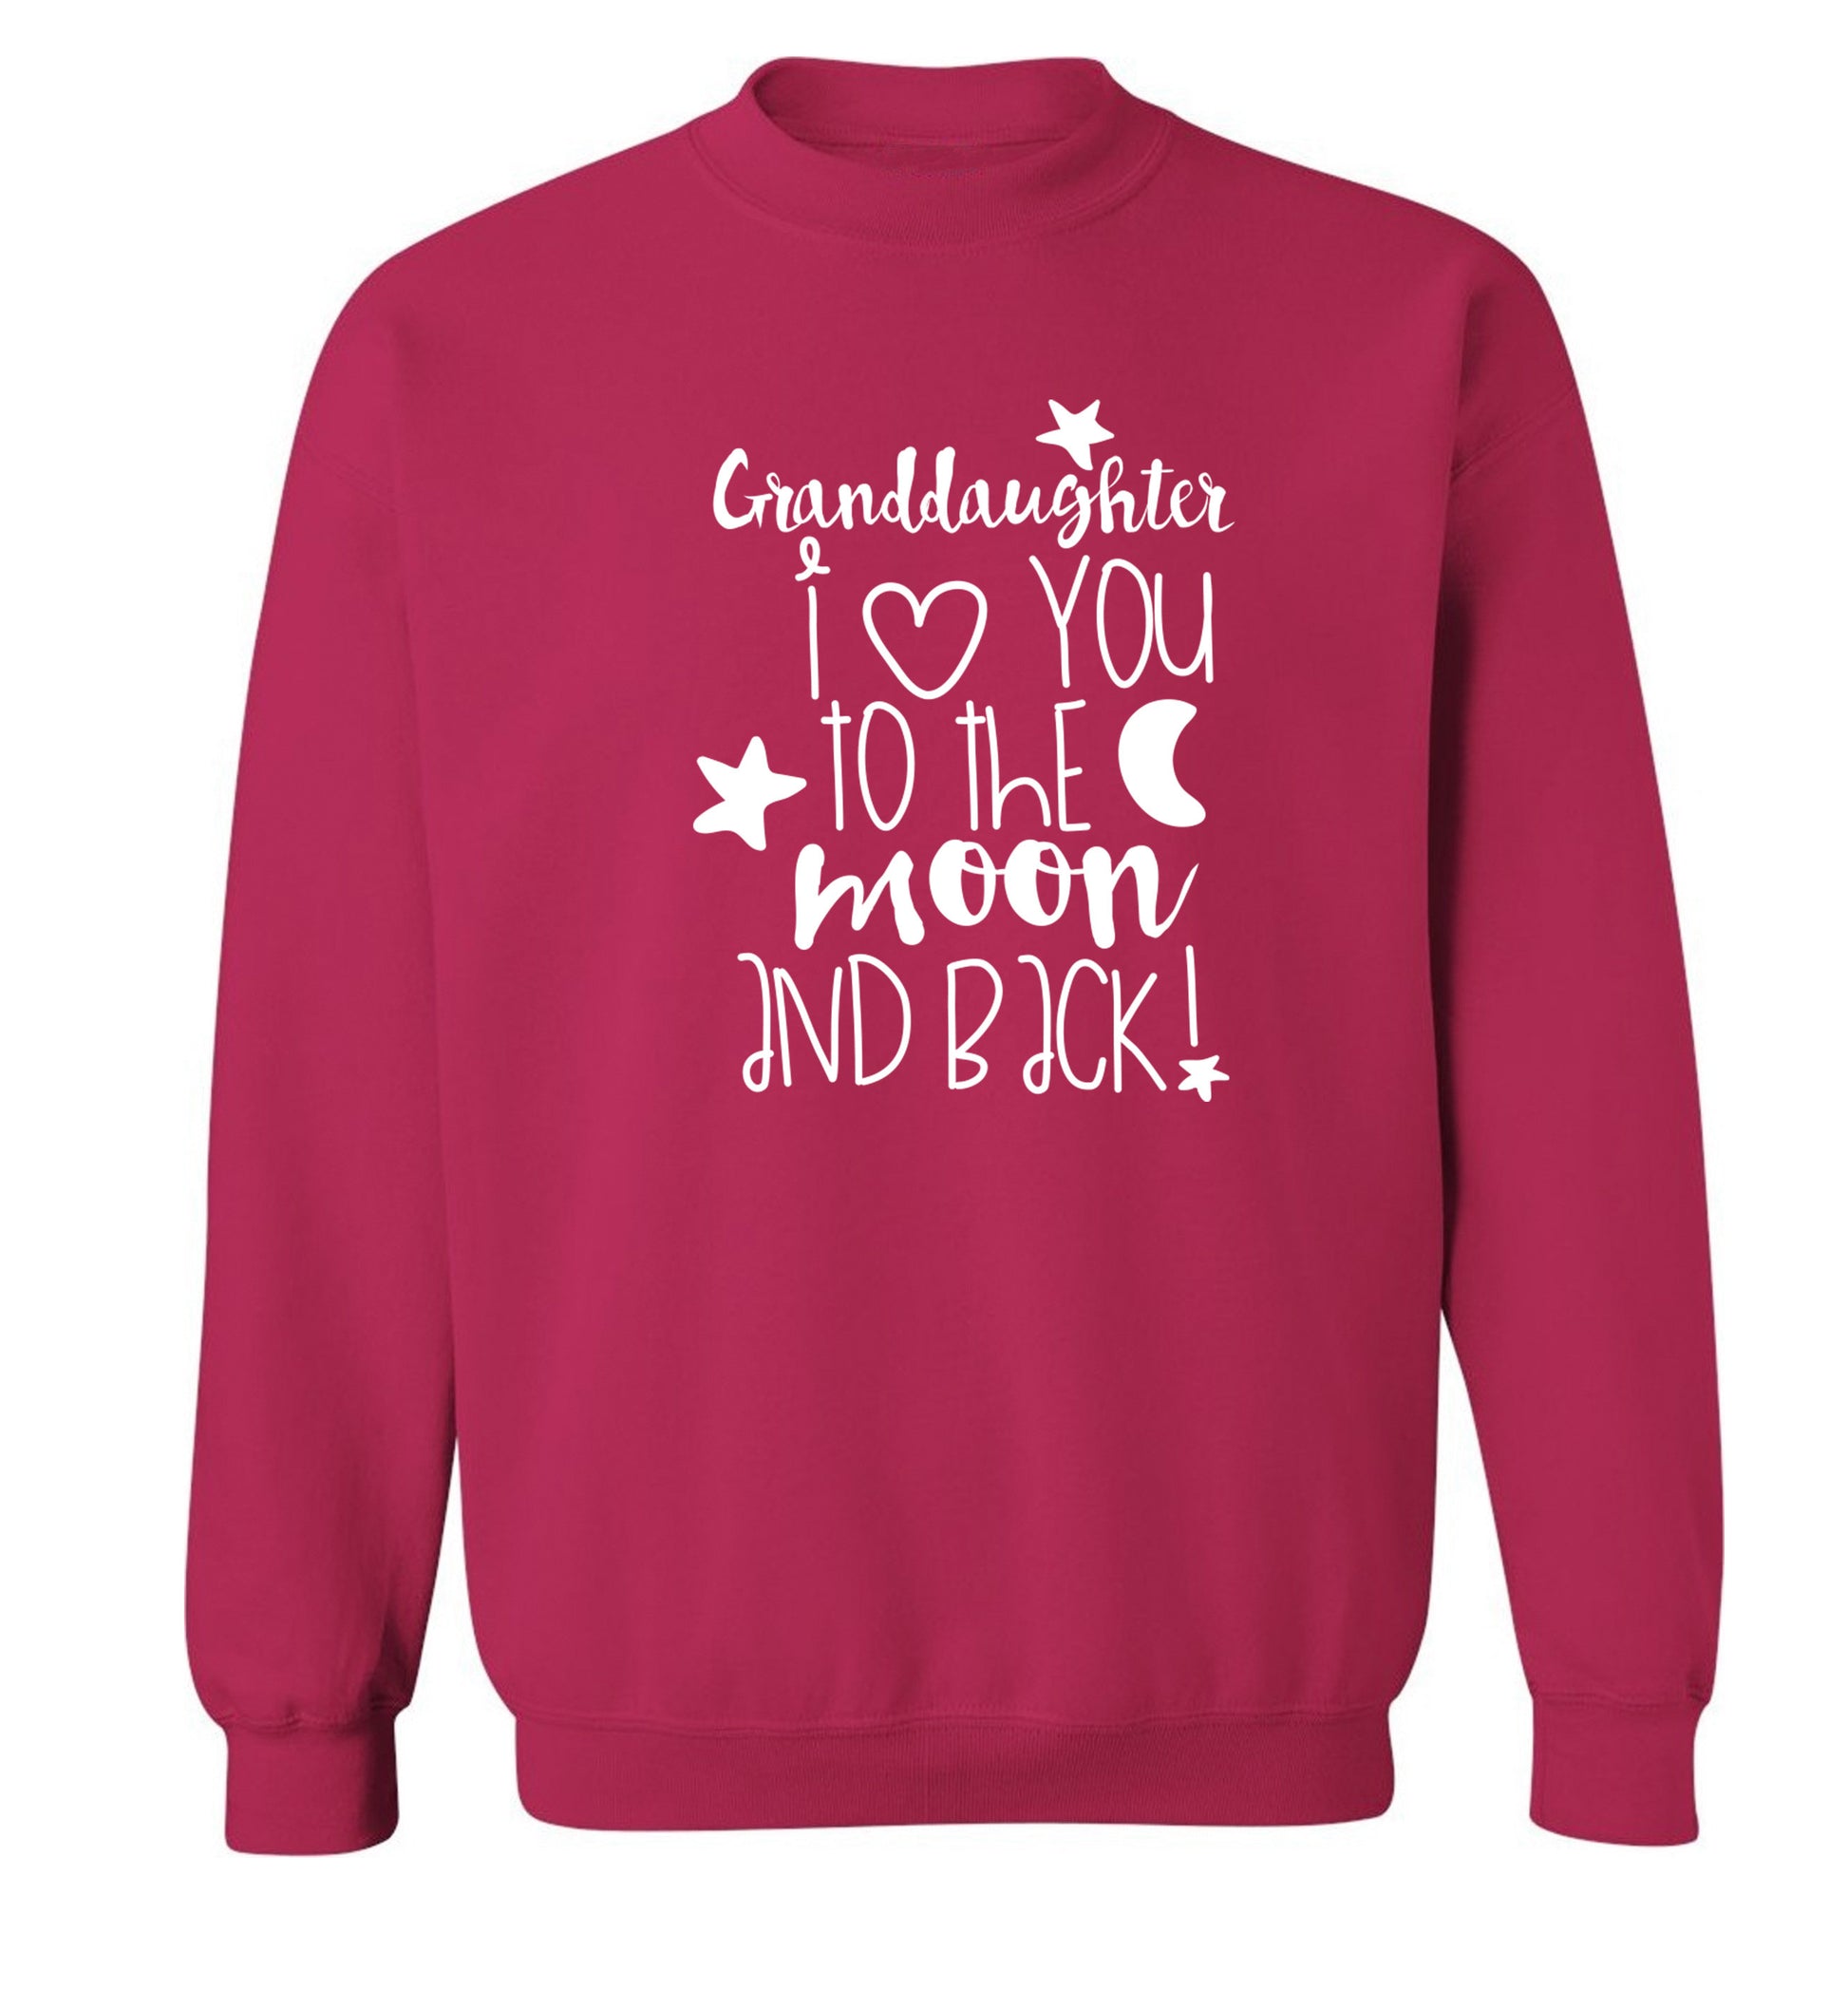 Granddaughter I love you to the moon and back Adult's unisex pink  sweater XL